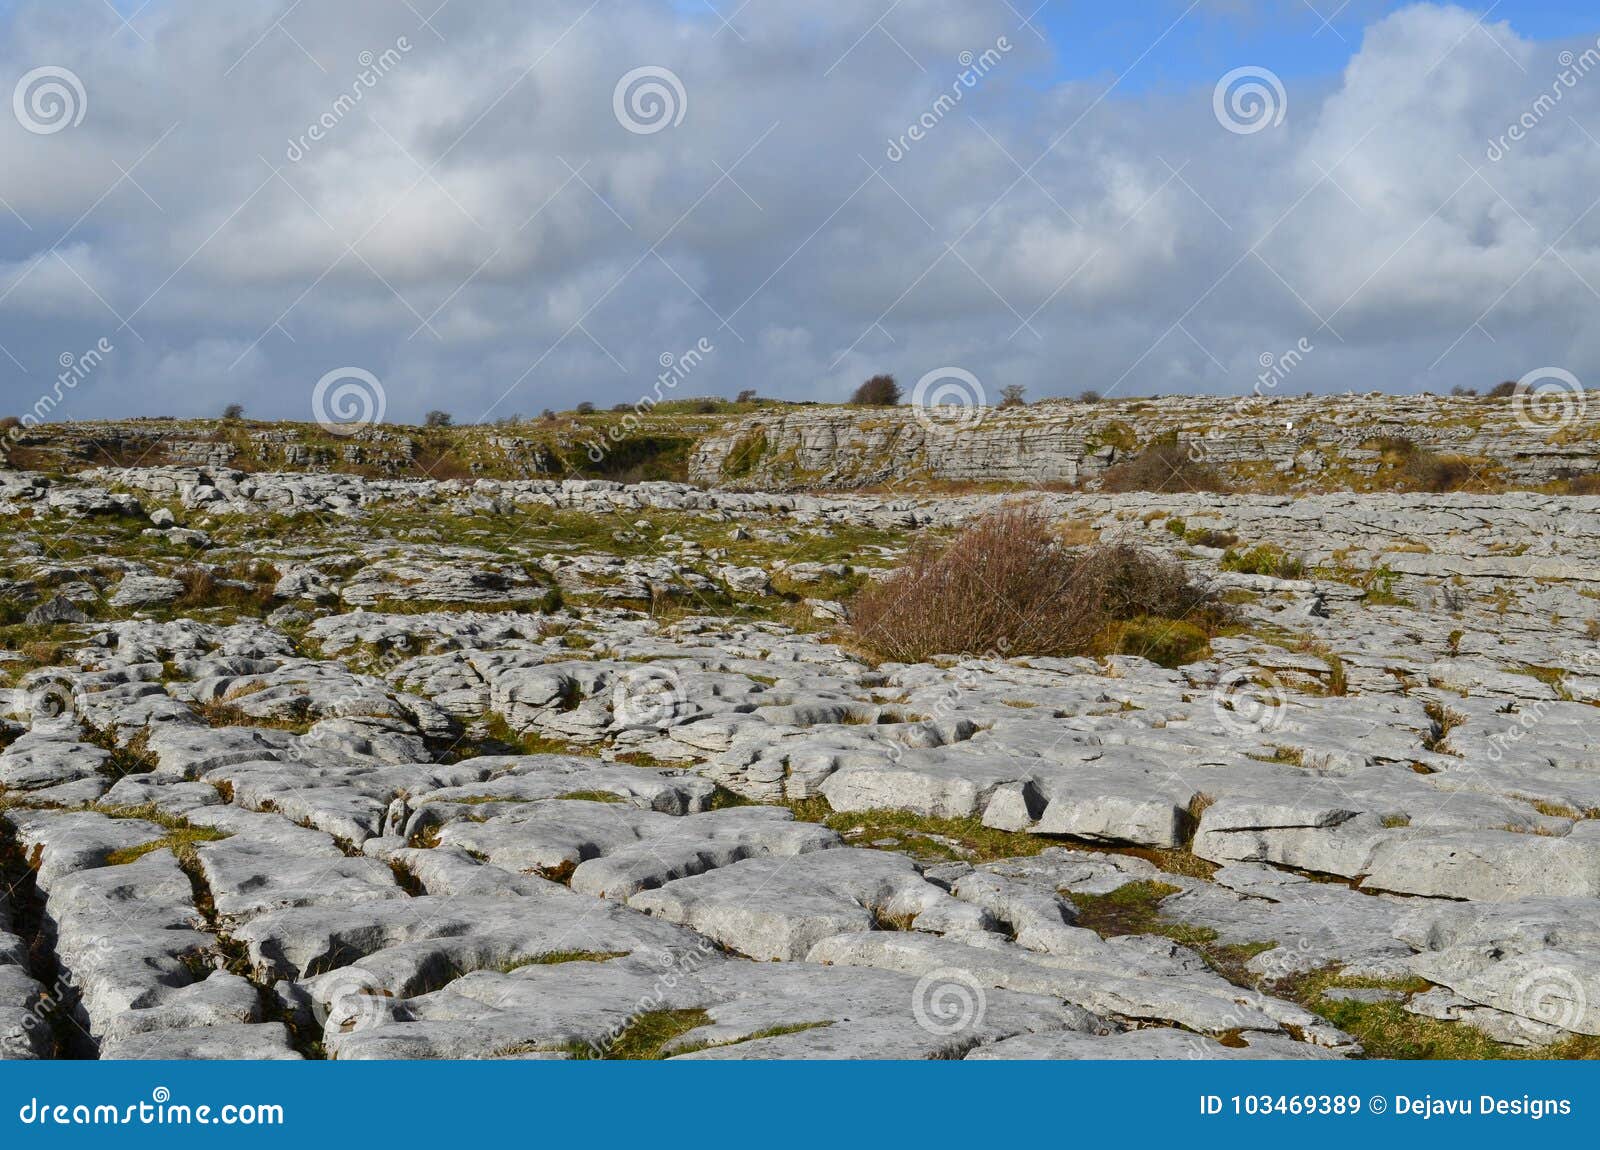 beautiful burren landscape with a field of stones